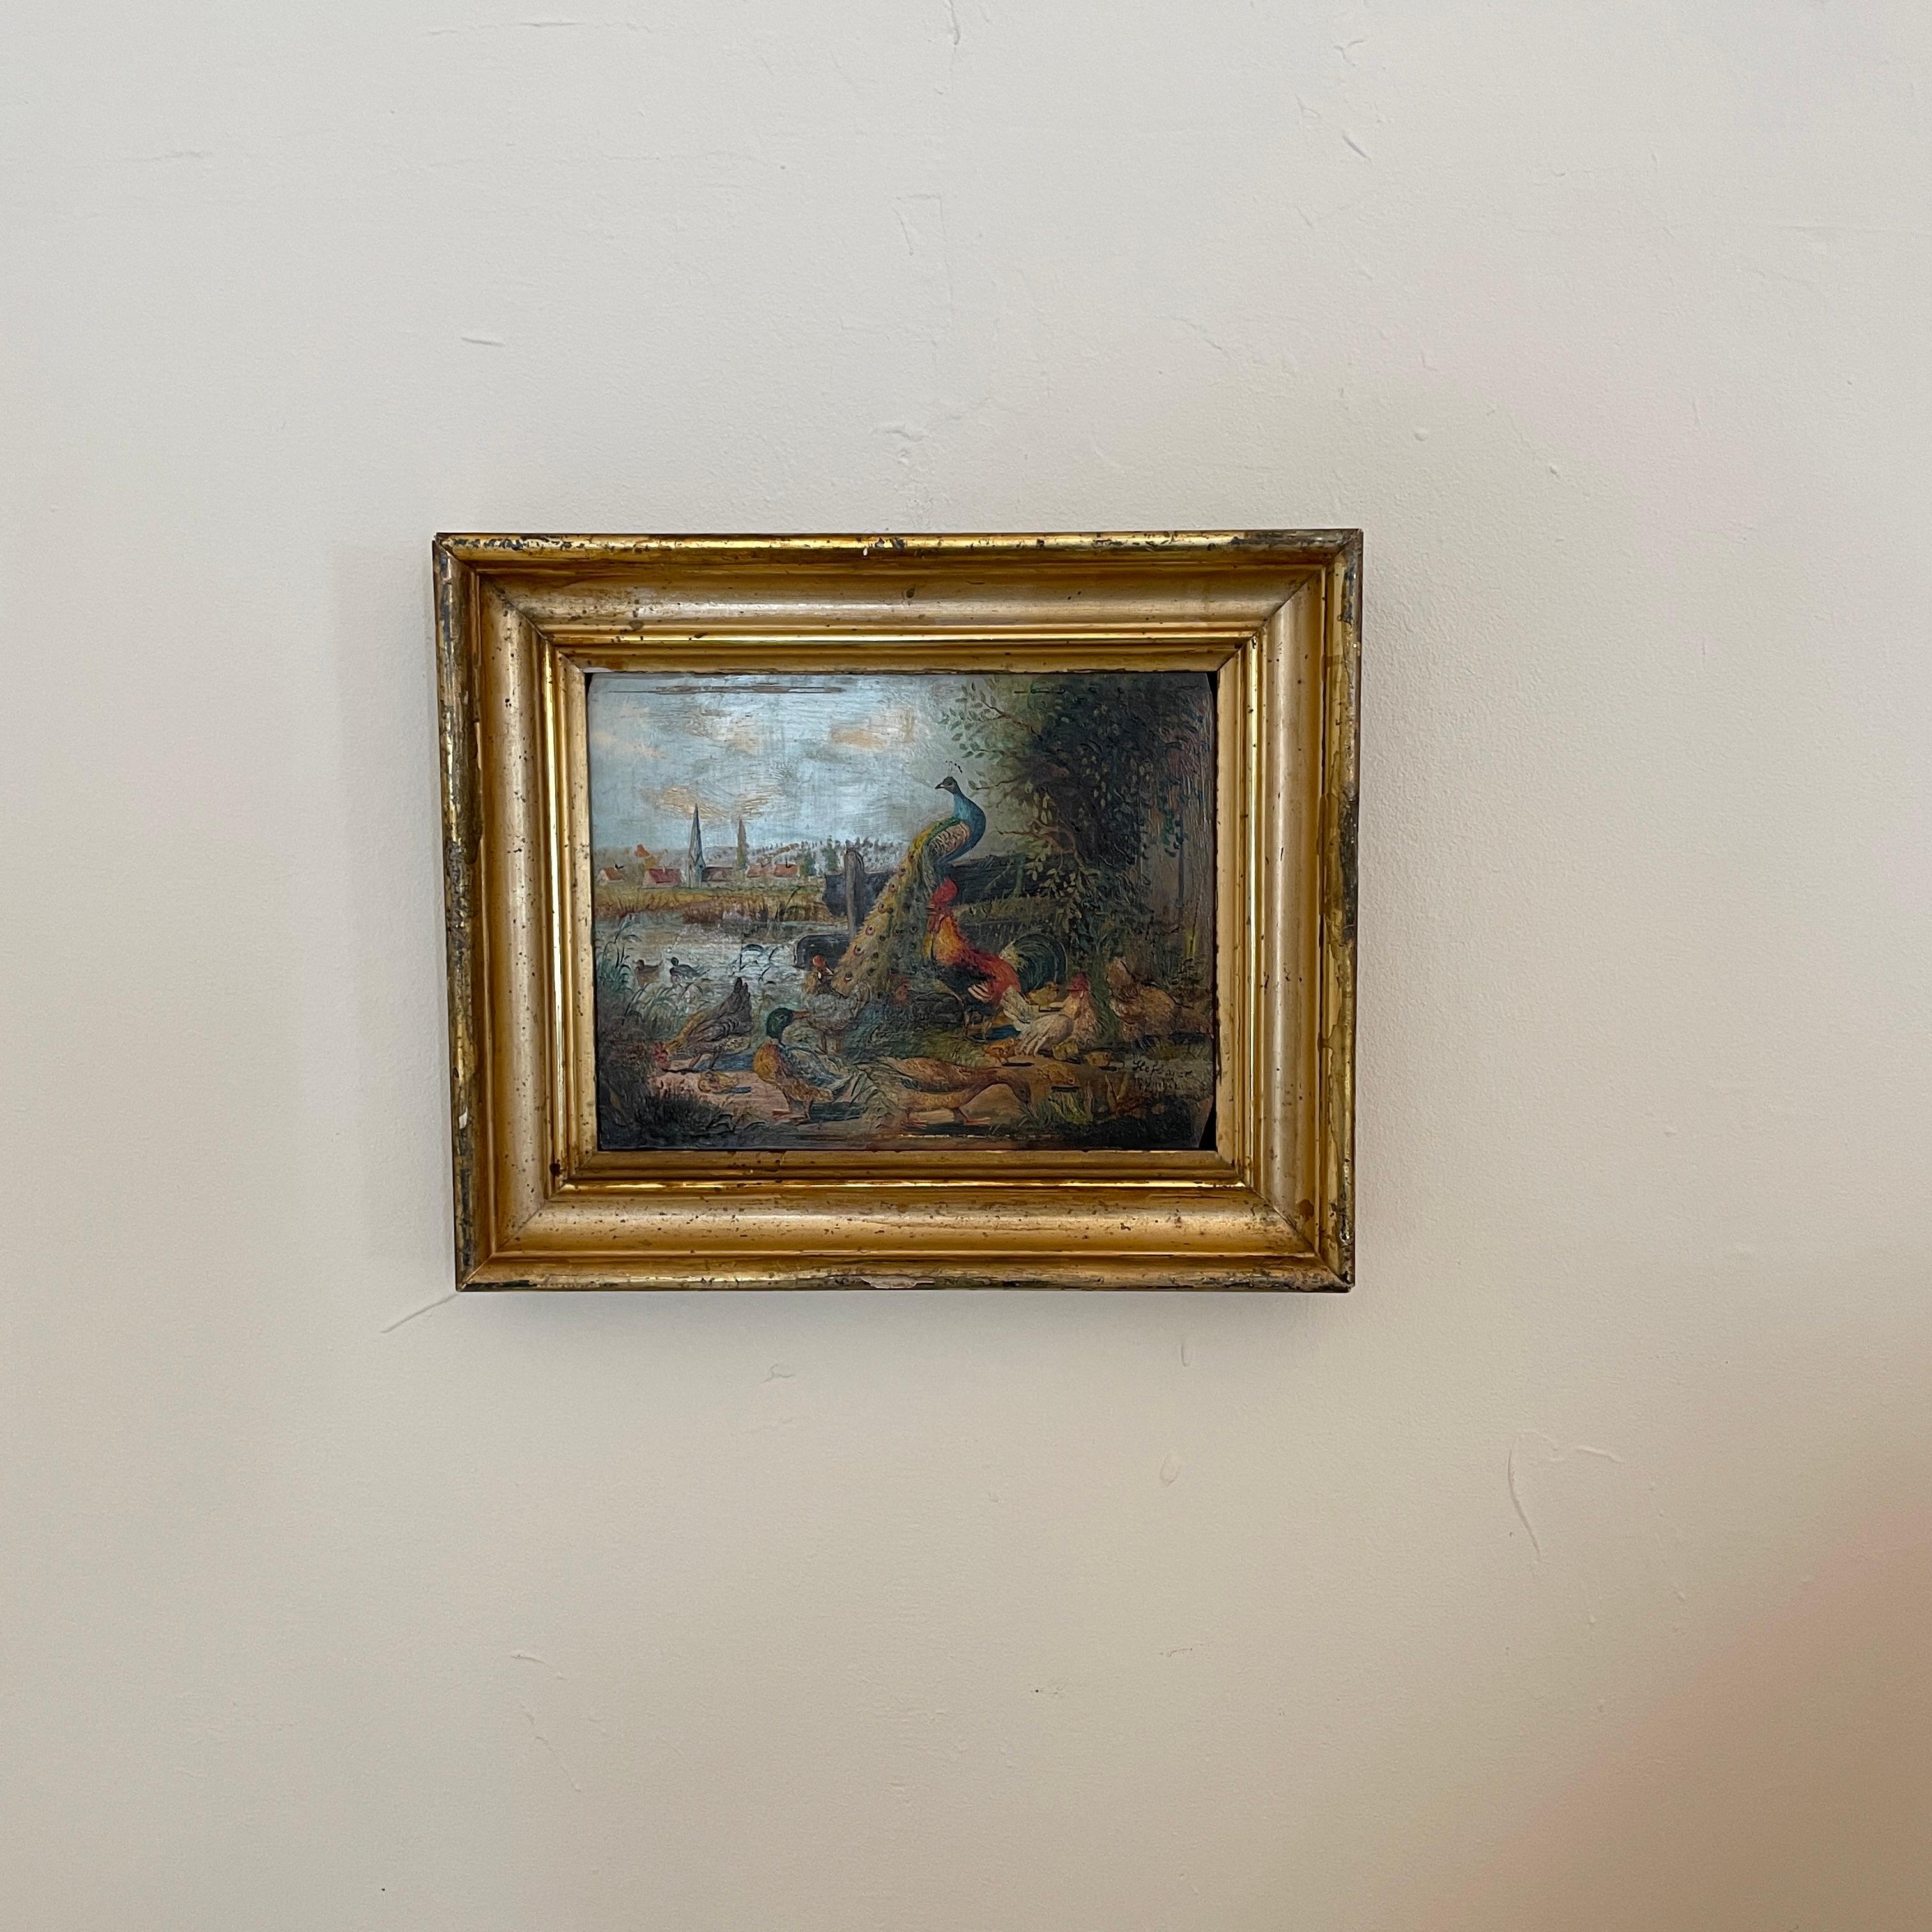 1950s German Oil Painting on Wood in an Old Gilded Frame by Josef Hofbauer For Sale 1